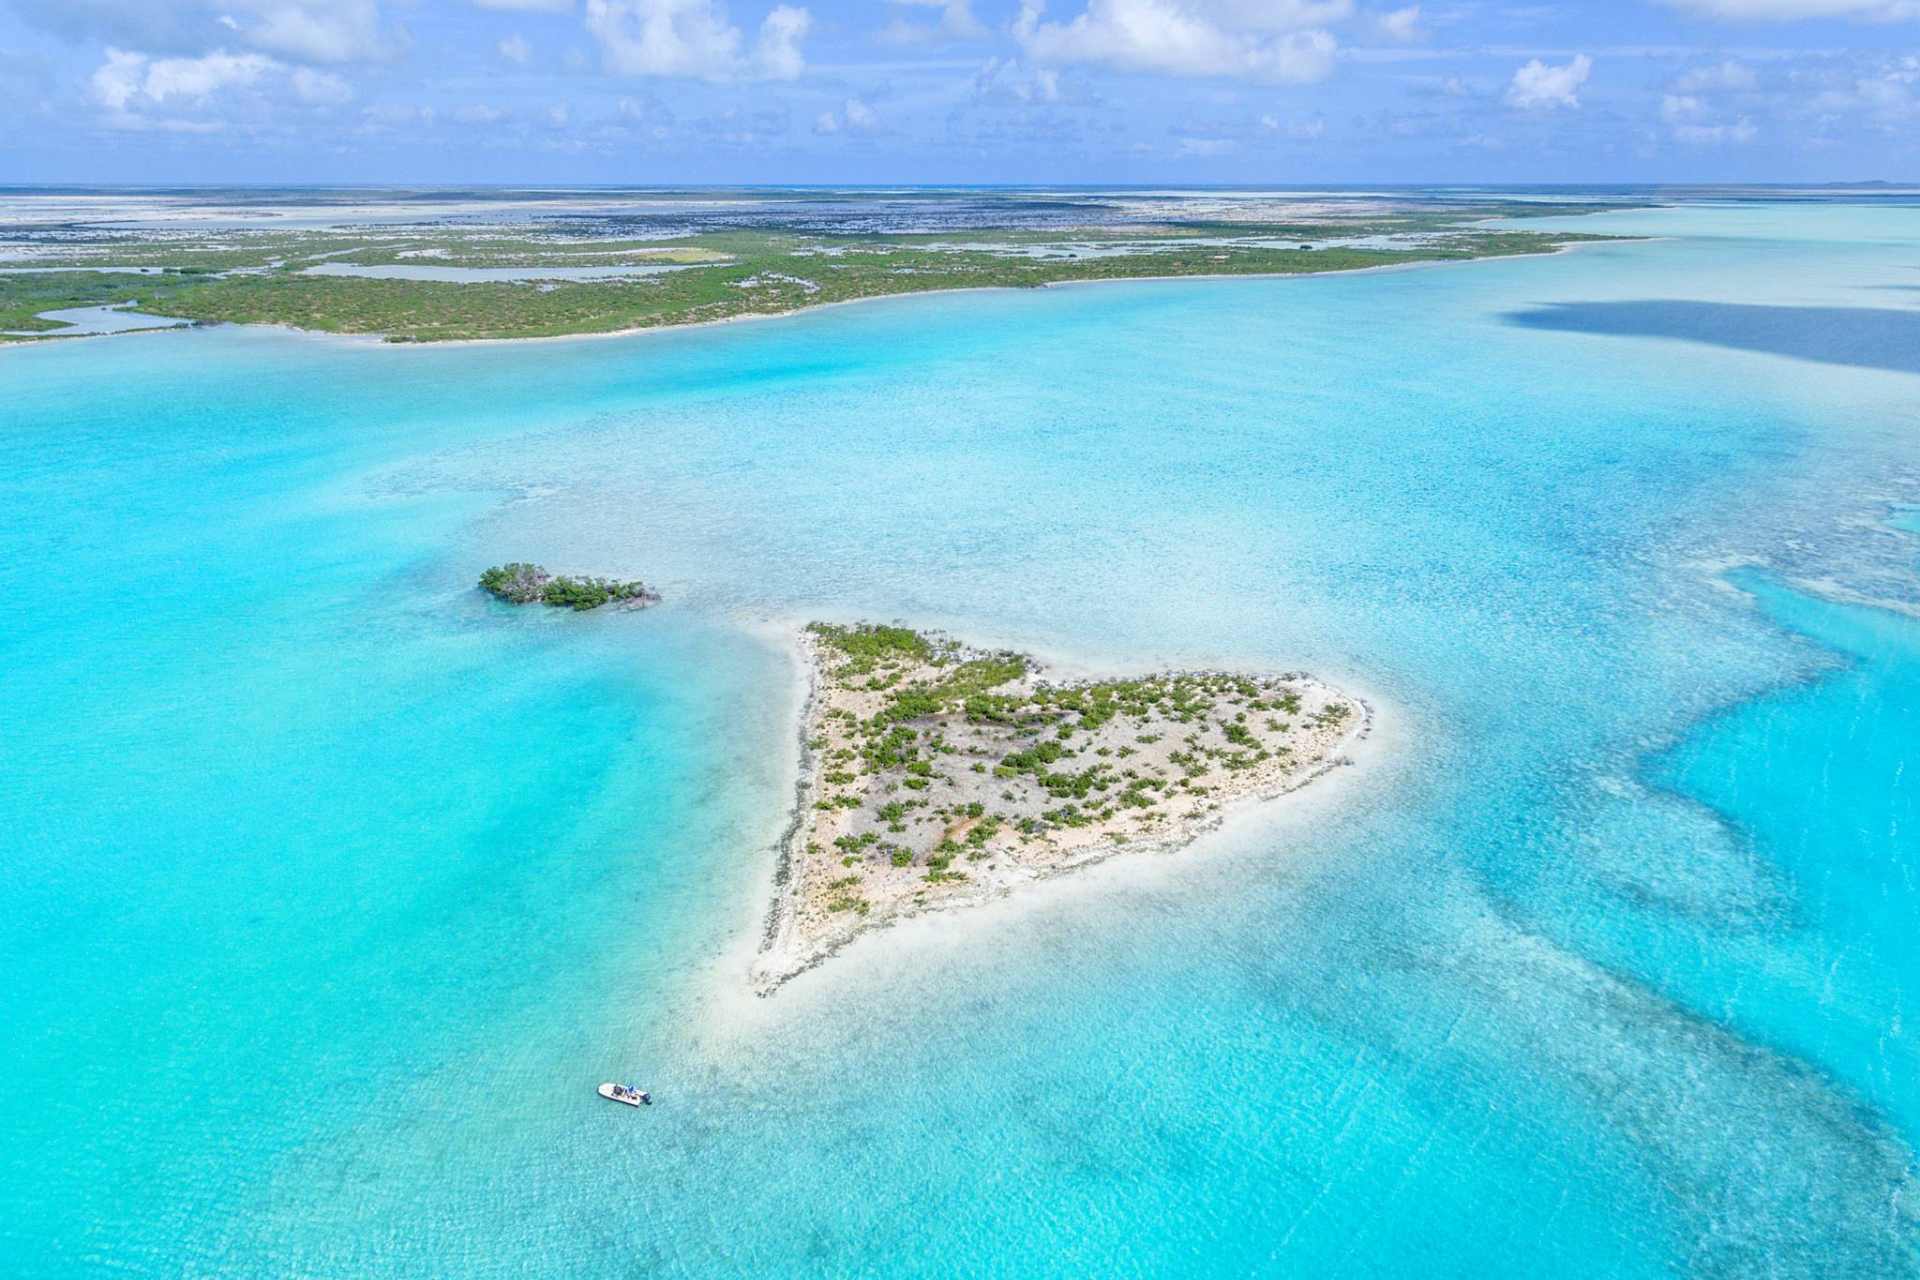 The archipelago of Turks and Caicos is an unspoiled jewel of the Caribbean.